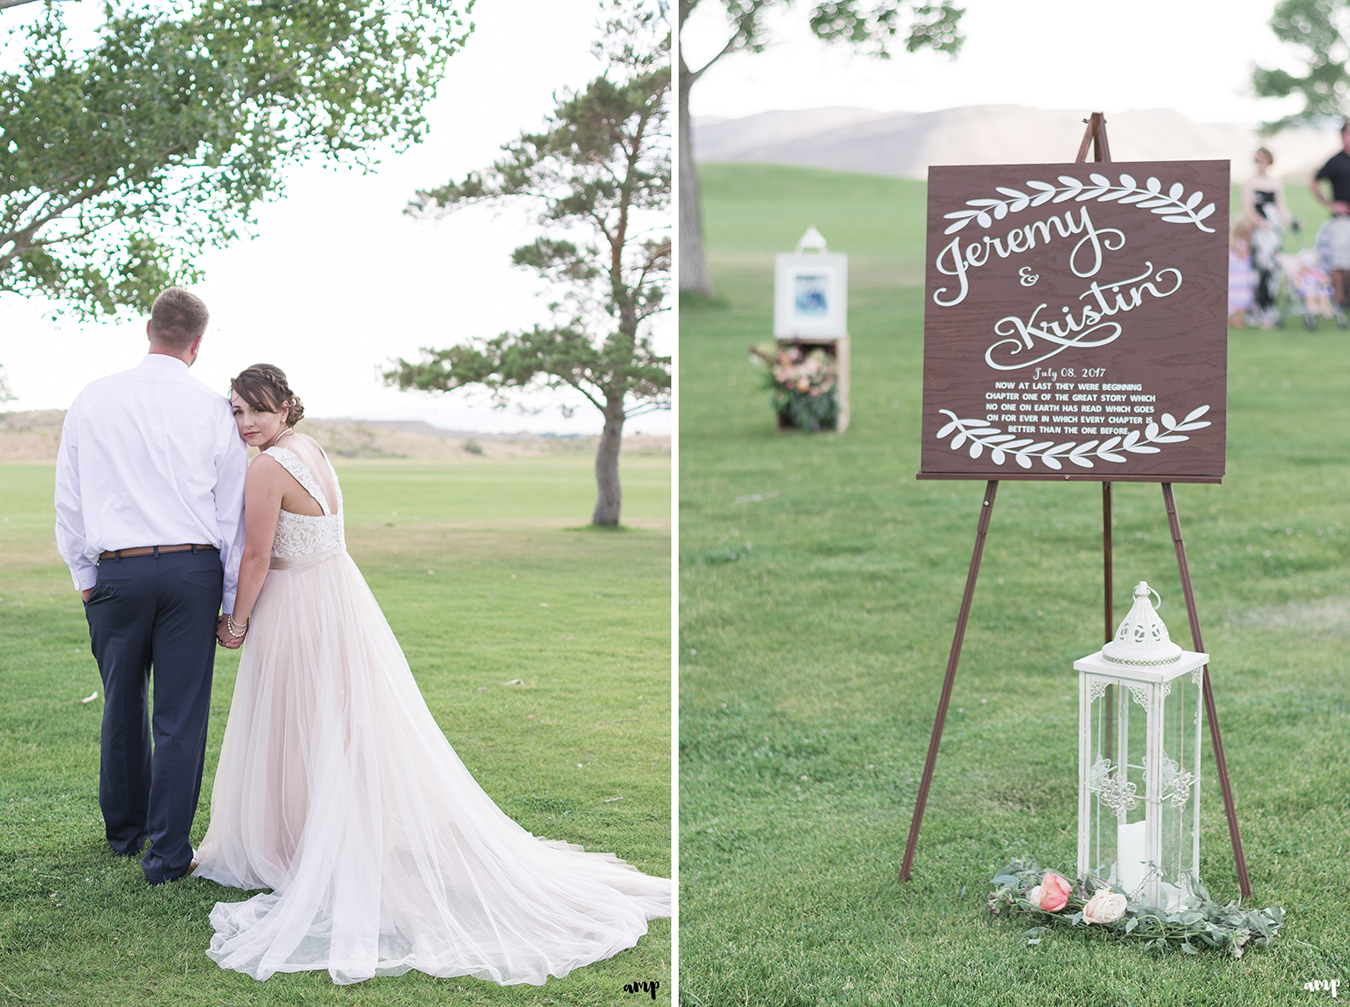 Custom wooden calligraphy sign at entrance to ceremony